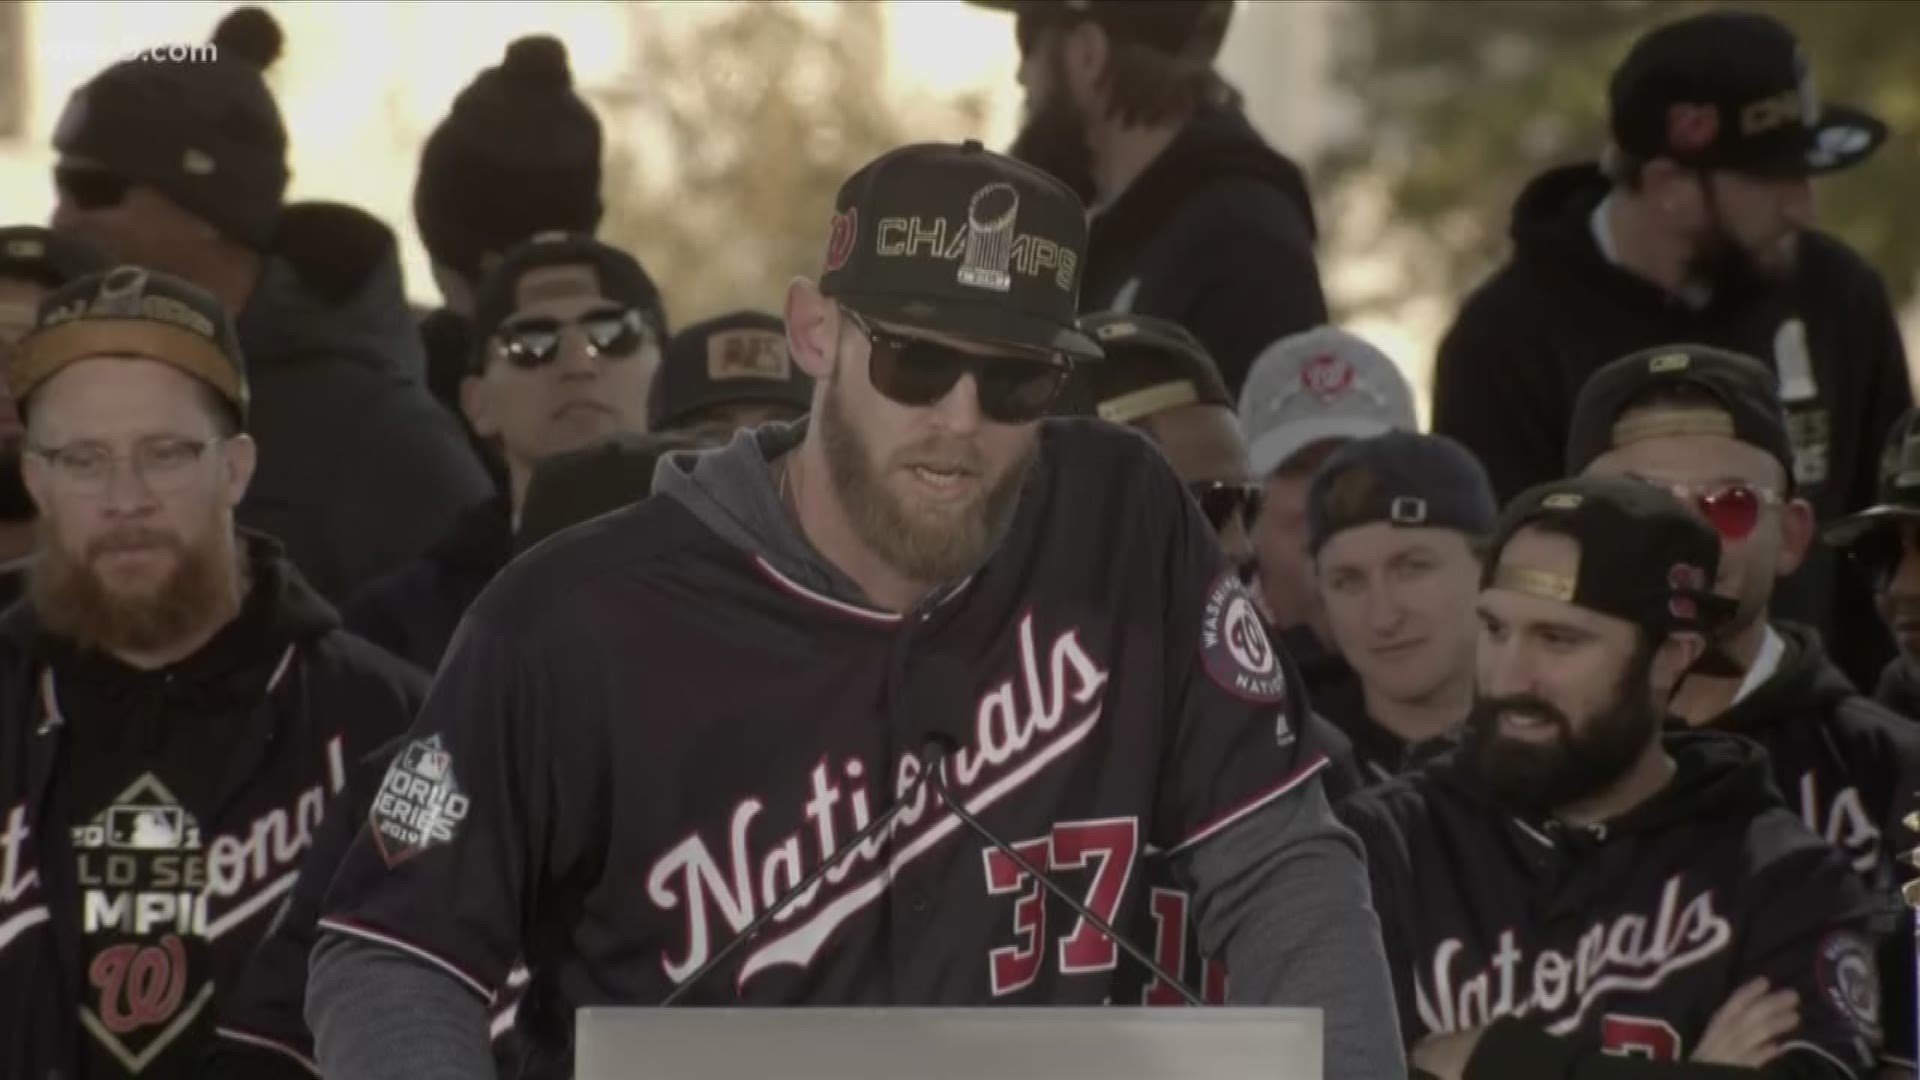 WATCH: All of the speeches from the Nationals World Series Parade